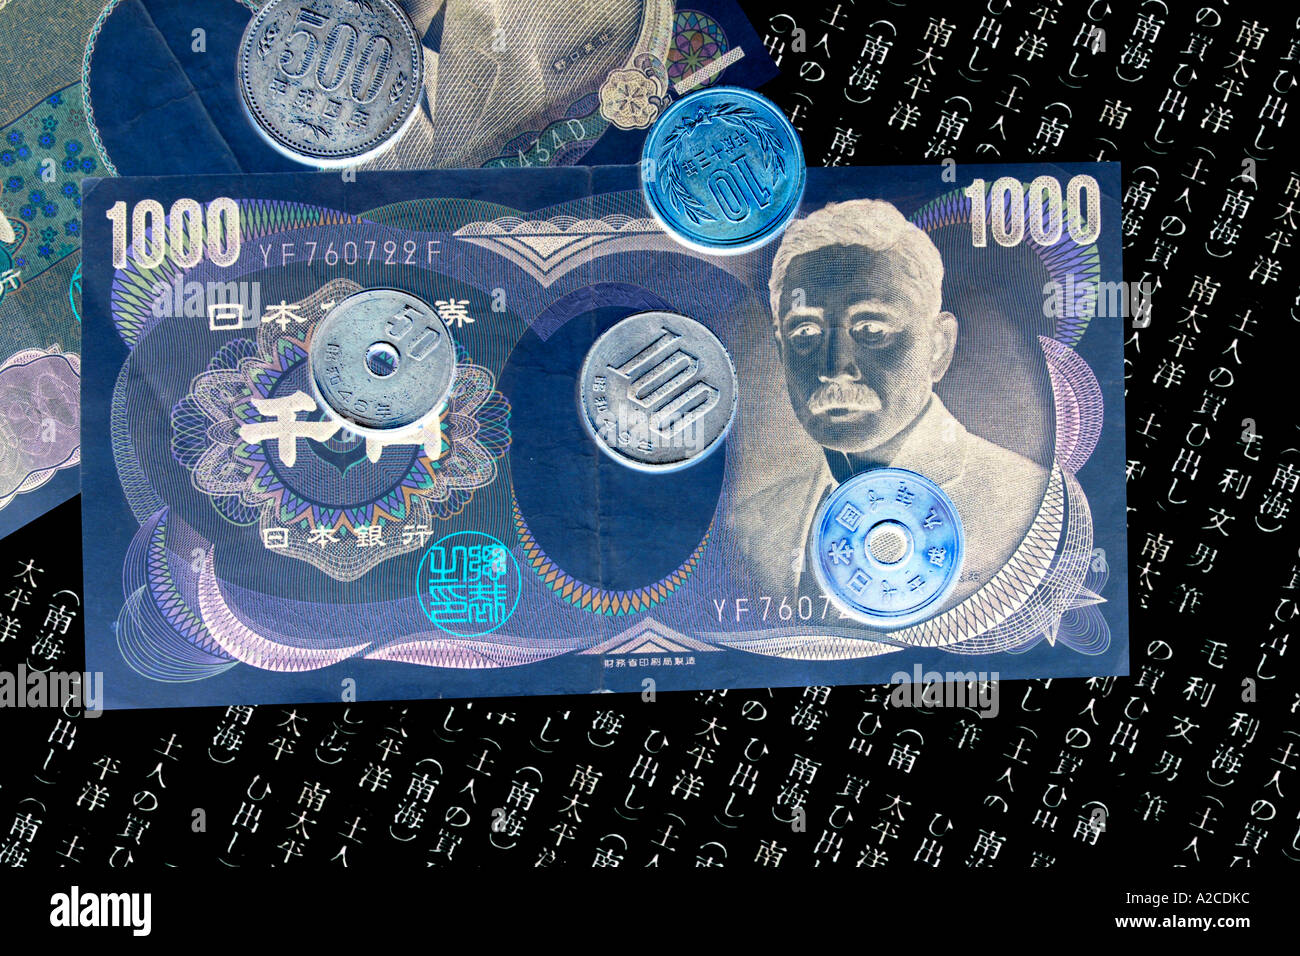 A concept image of Japanese 1000 Yen notes and coins against a reversed written background. Stock Photo